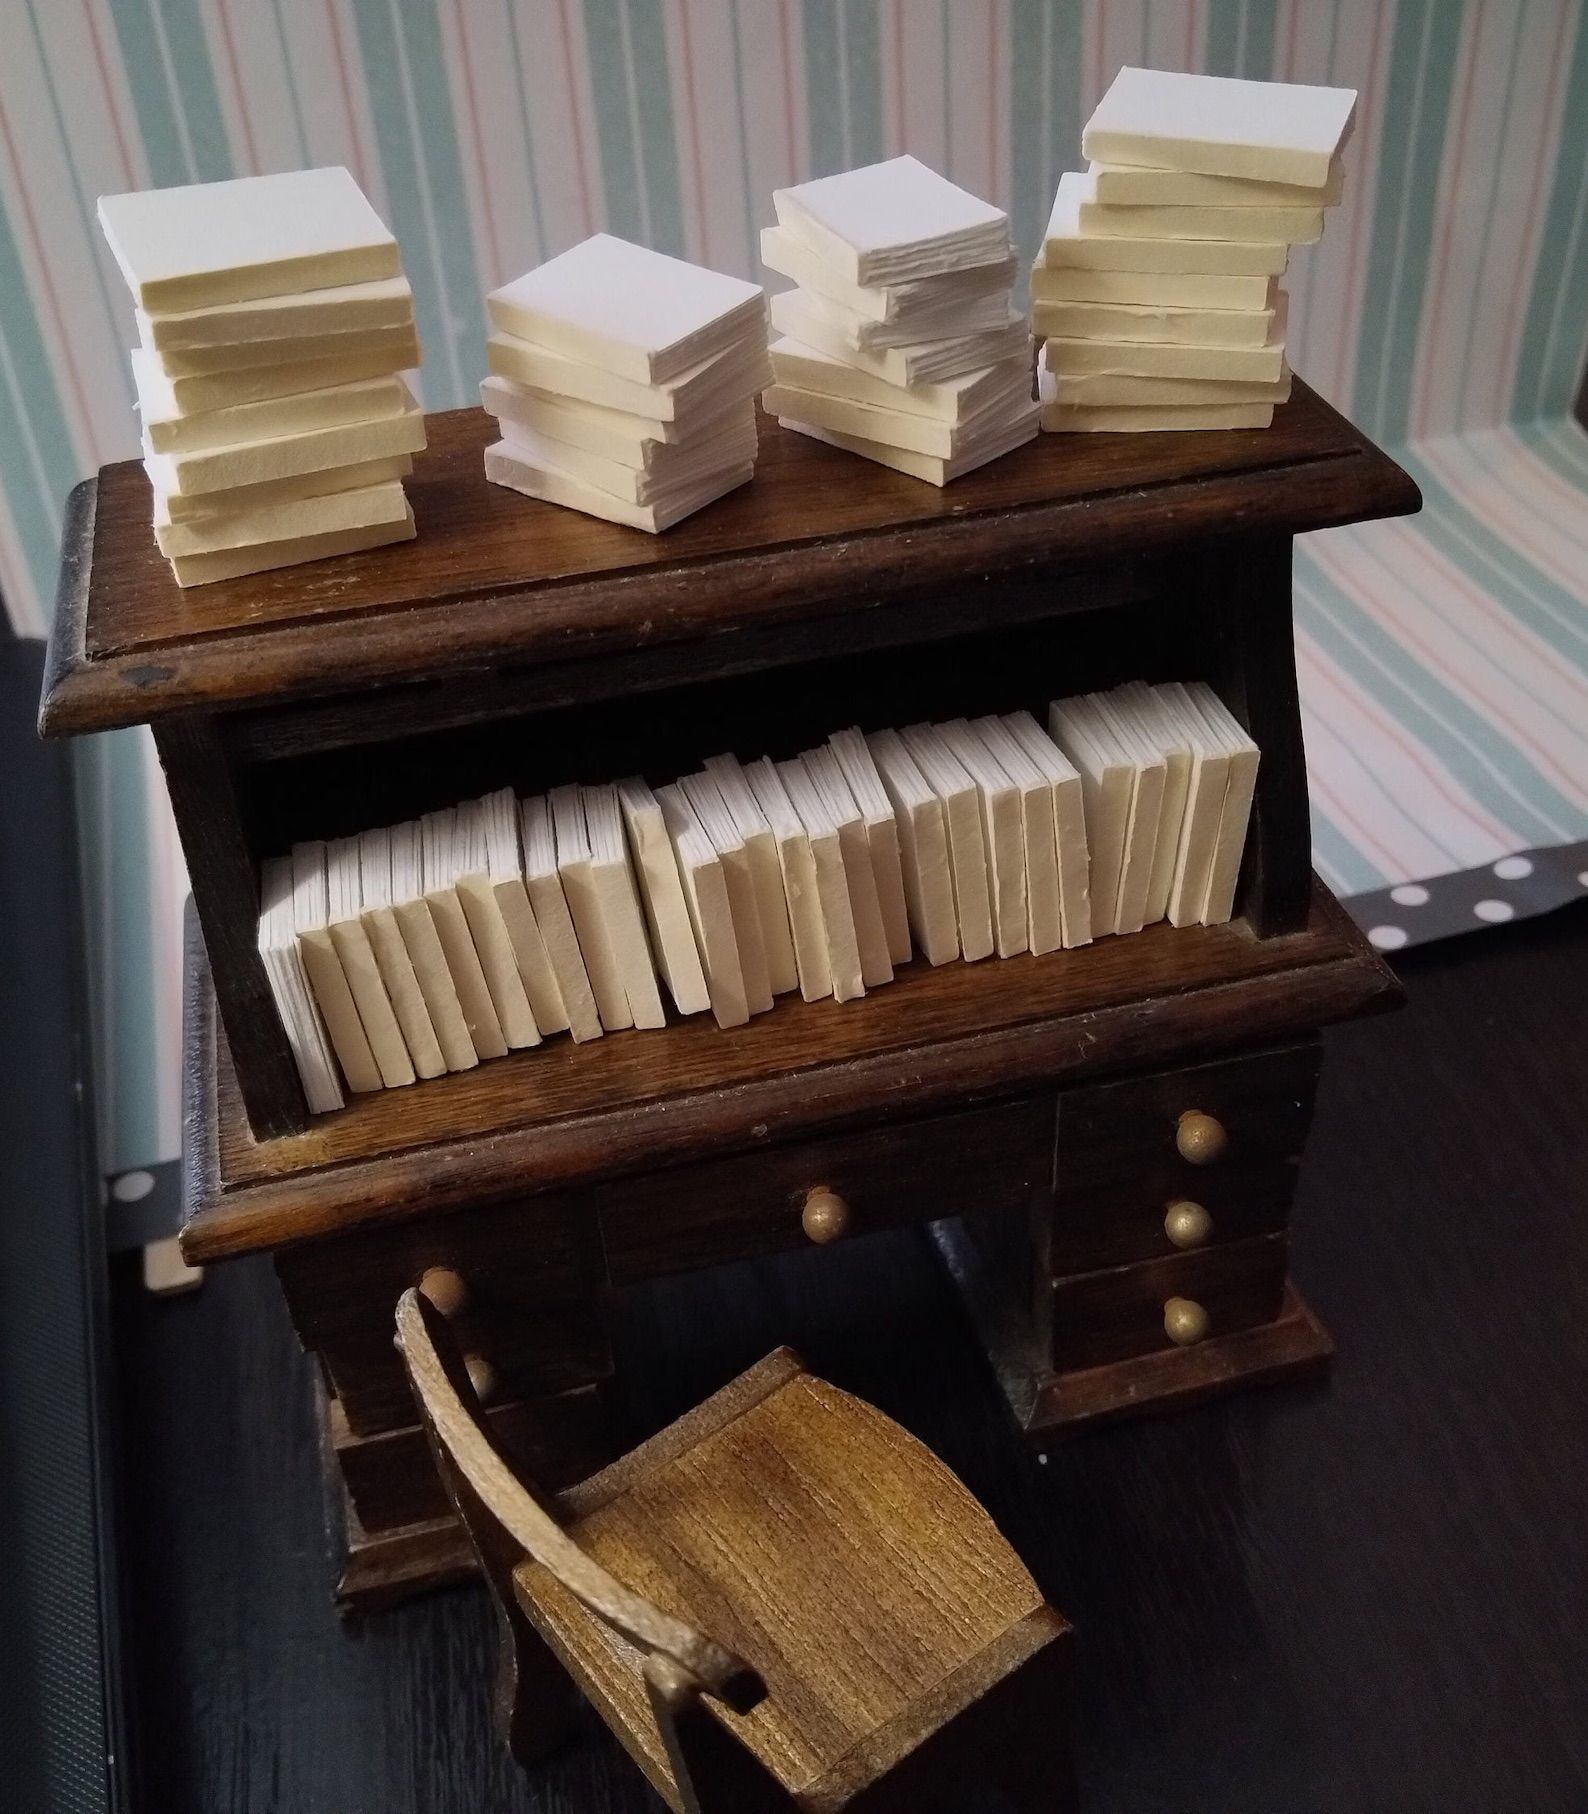 Mini books are in stacks on a mini wooden desk with a mini chair in front of it.